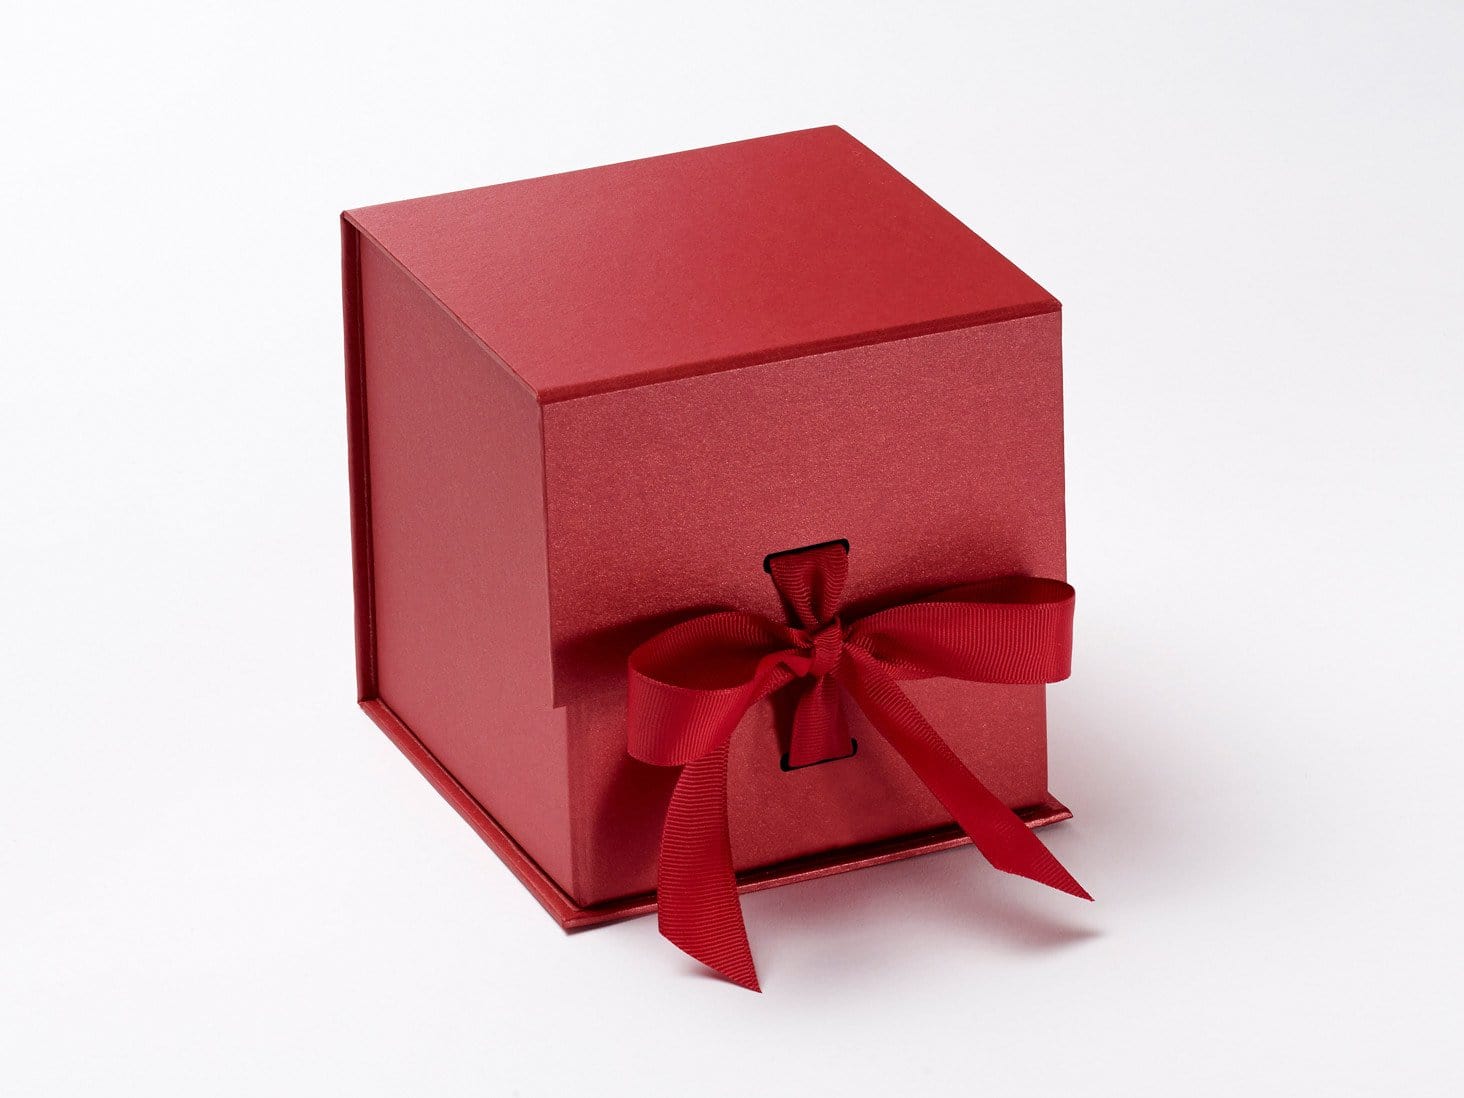 Sample Large Red Cube with Slots and Changeable Ribbon from Foldabox UK